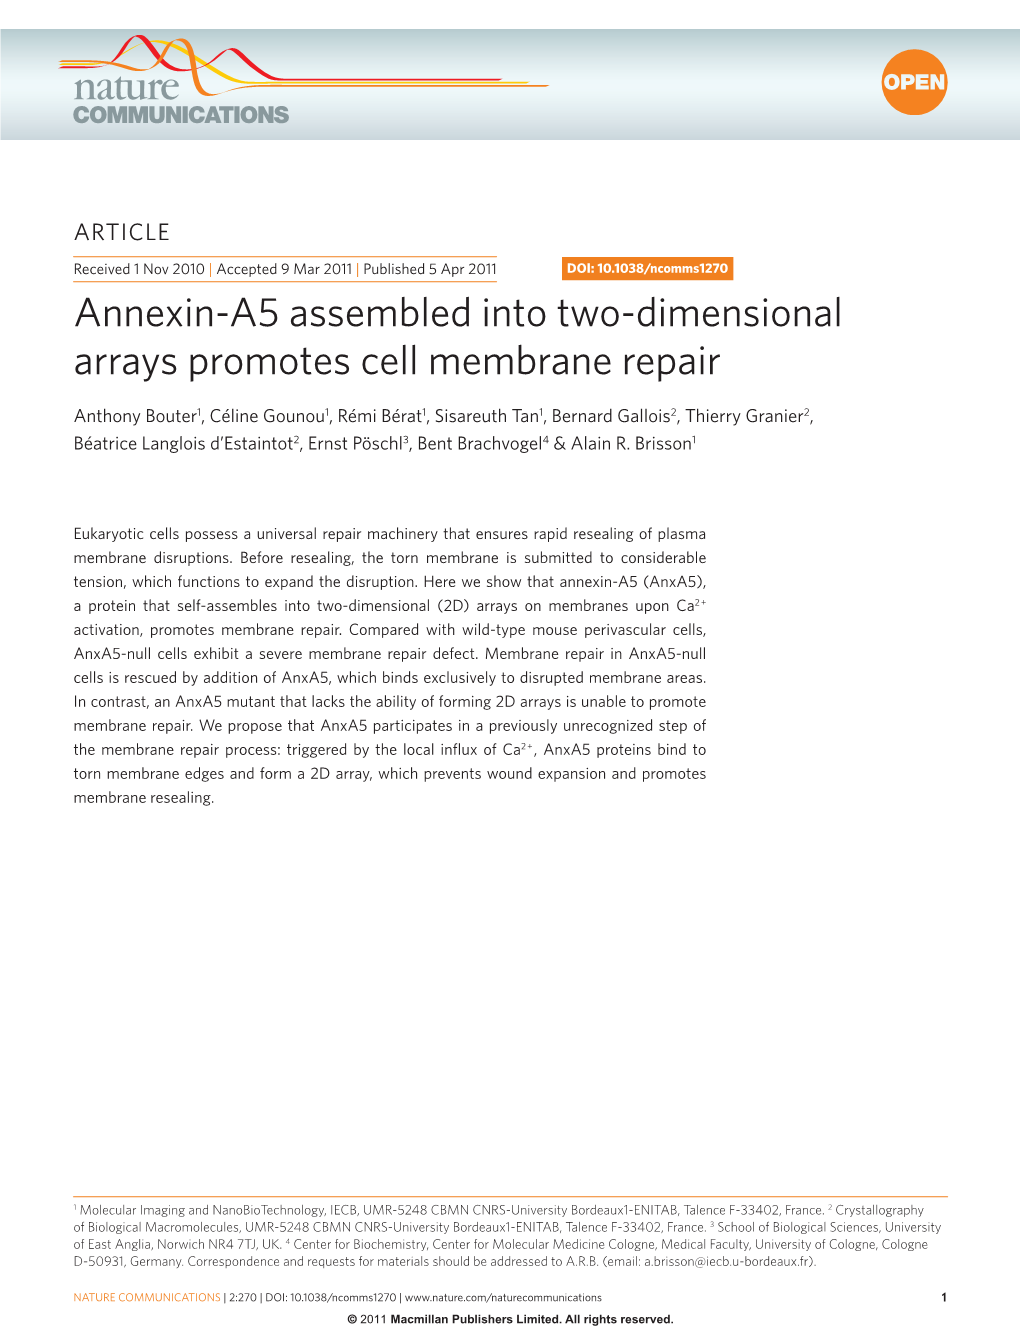 Annexin-A5 Assembled Into Two-Dimensional Arrays Promotes Cell Membrane Repair